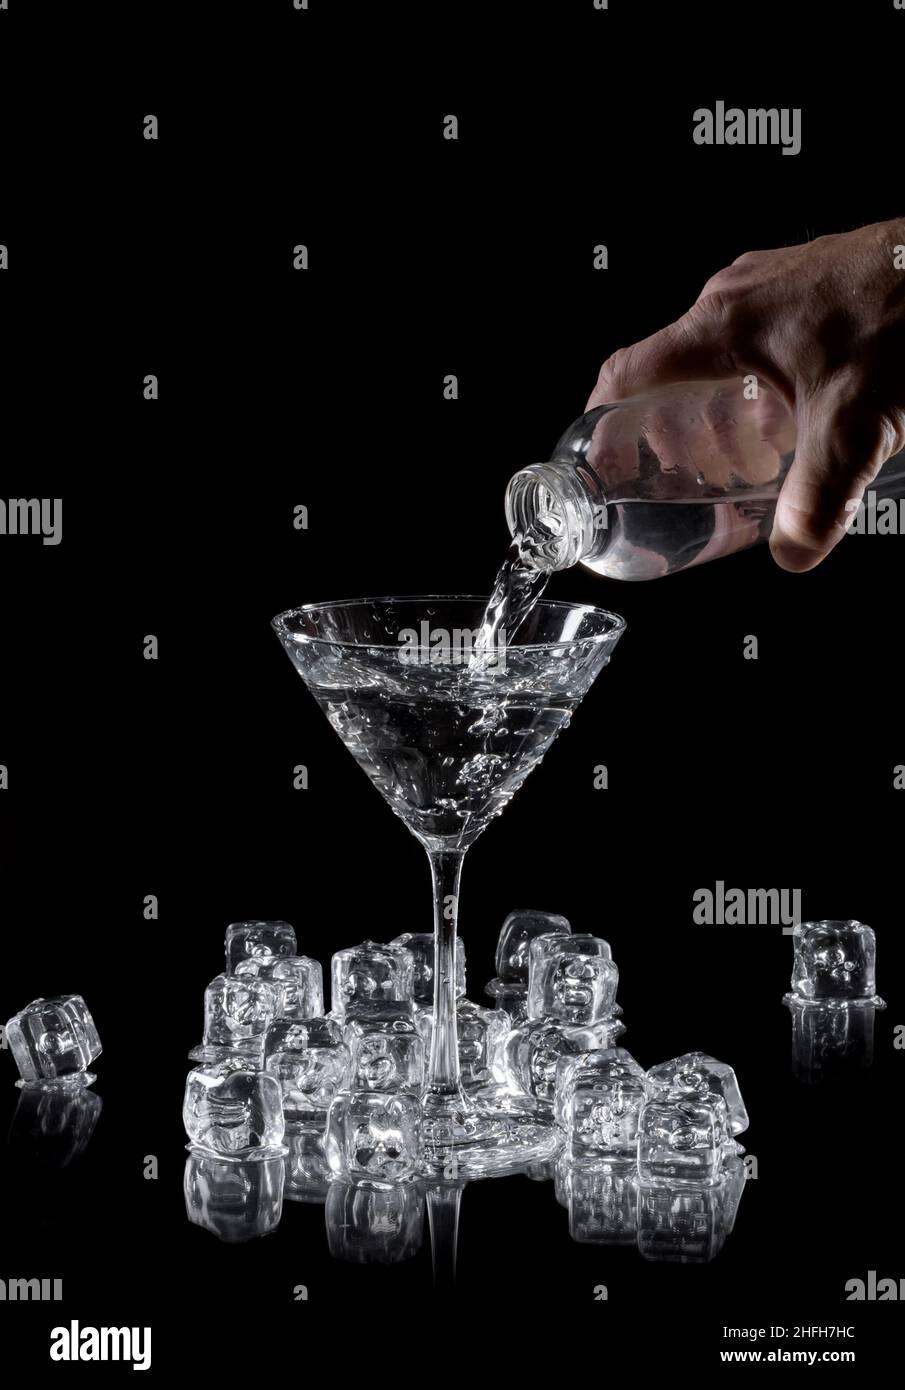 a man's hand pouring gin or water into a martini glass surrounded by ice cubes on a black reflective background, with copy space Stock Photo